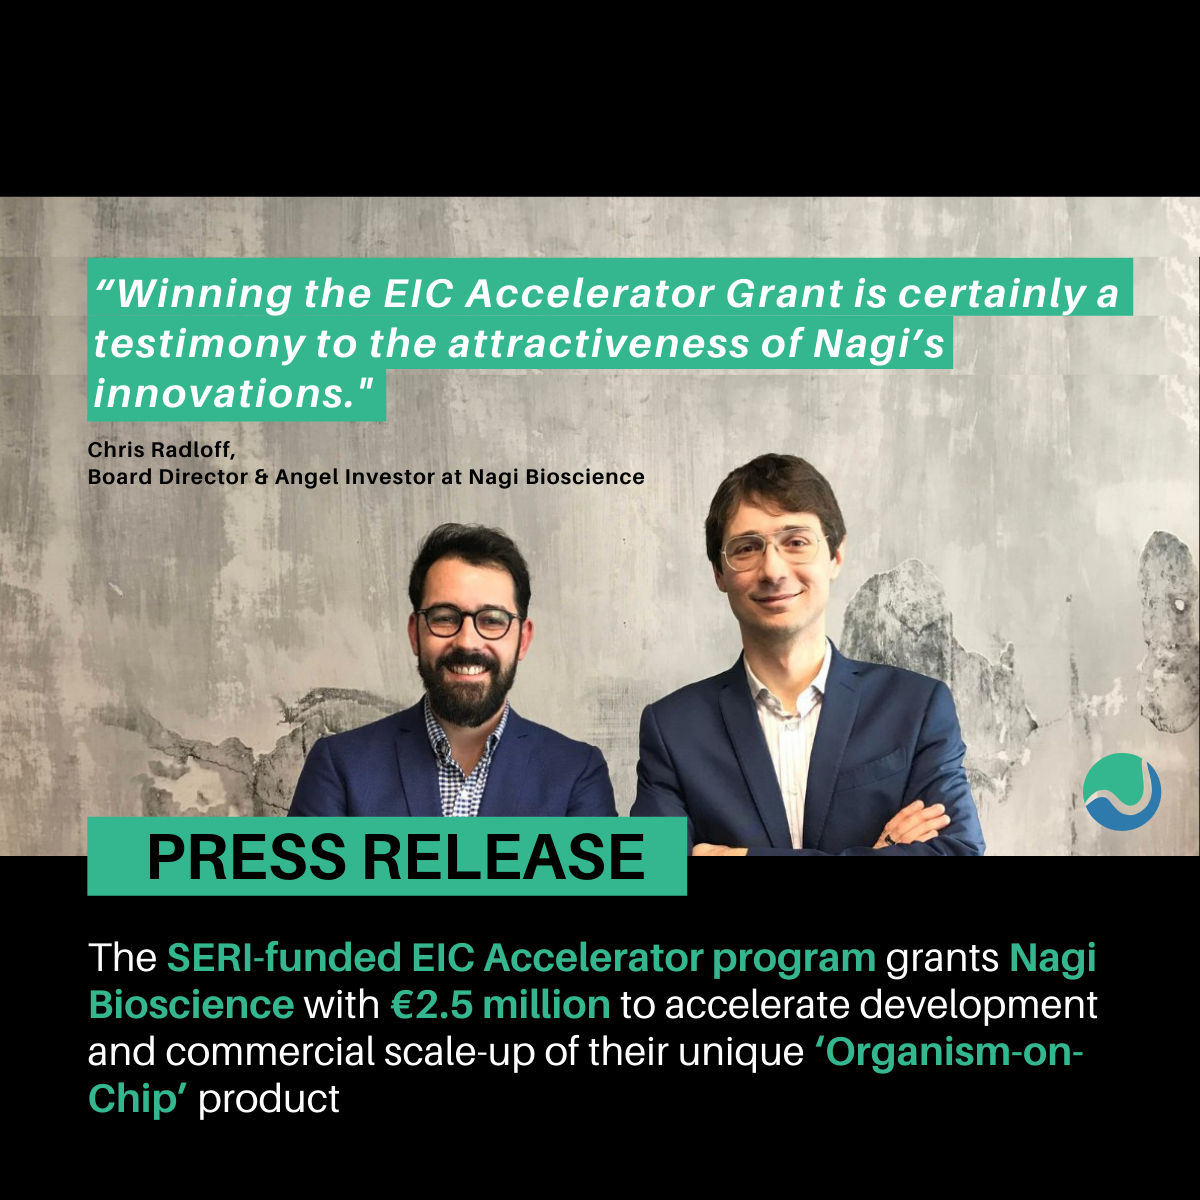 The SERI-funded EIC Accelerator program grants Nagi Bioscience with €2.5 million to accelerate development and commercial scale-up of their unique ‘Organism-on-Chip’ product